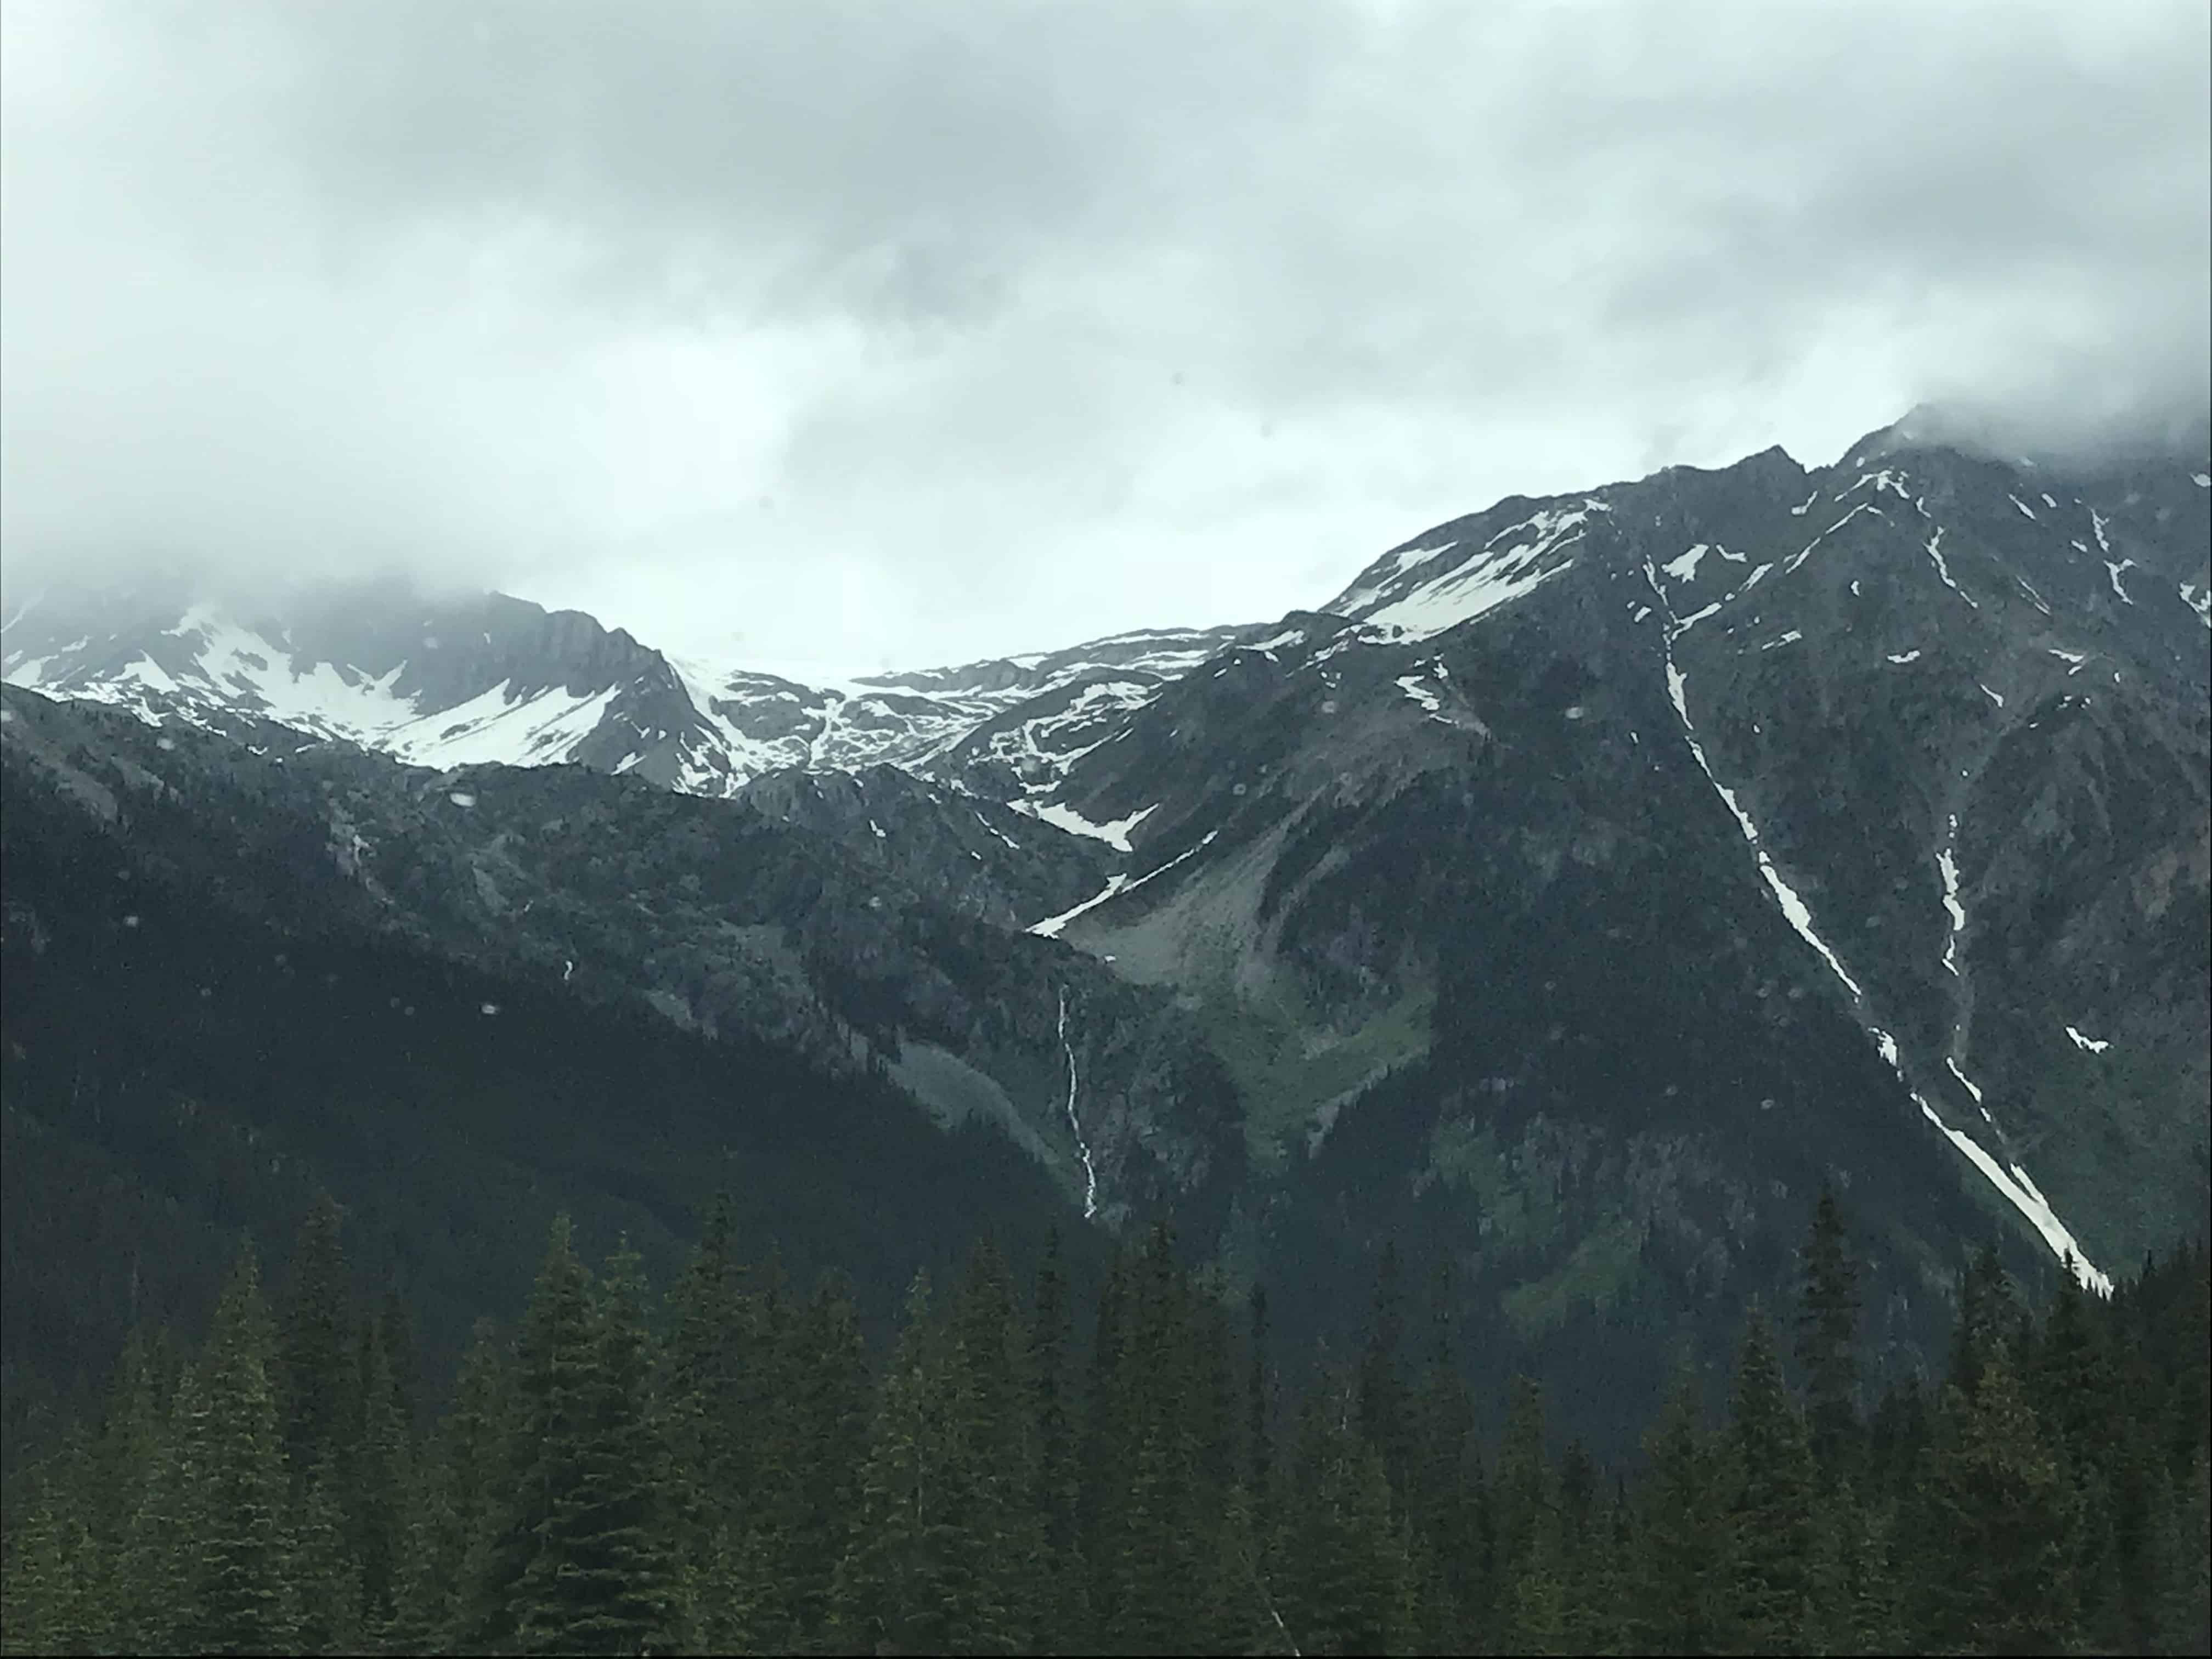 A tall, dark gray mountain range covered with snow overlooks a pine forest. A dark cloudy overcast. In the Canadian Rockies along the Trans-Canada Highway between Vancouver, British Columbia and Calgary, Alberta.